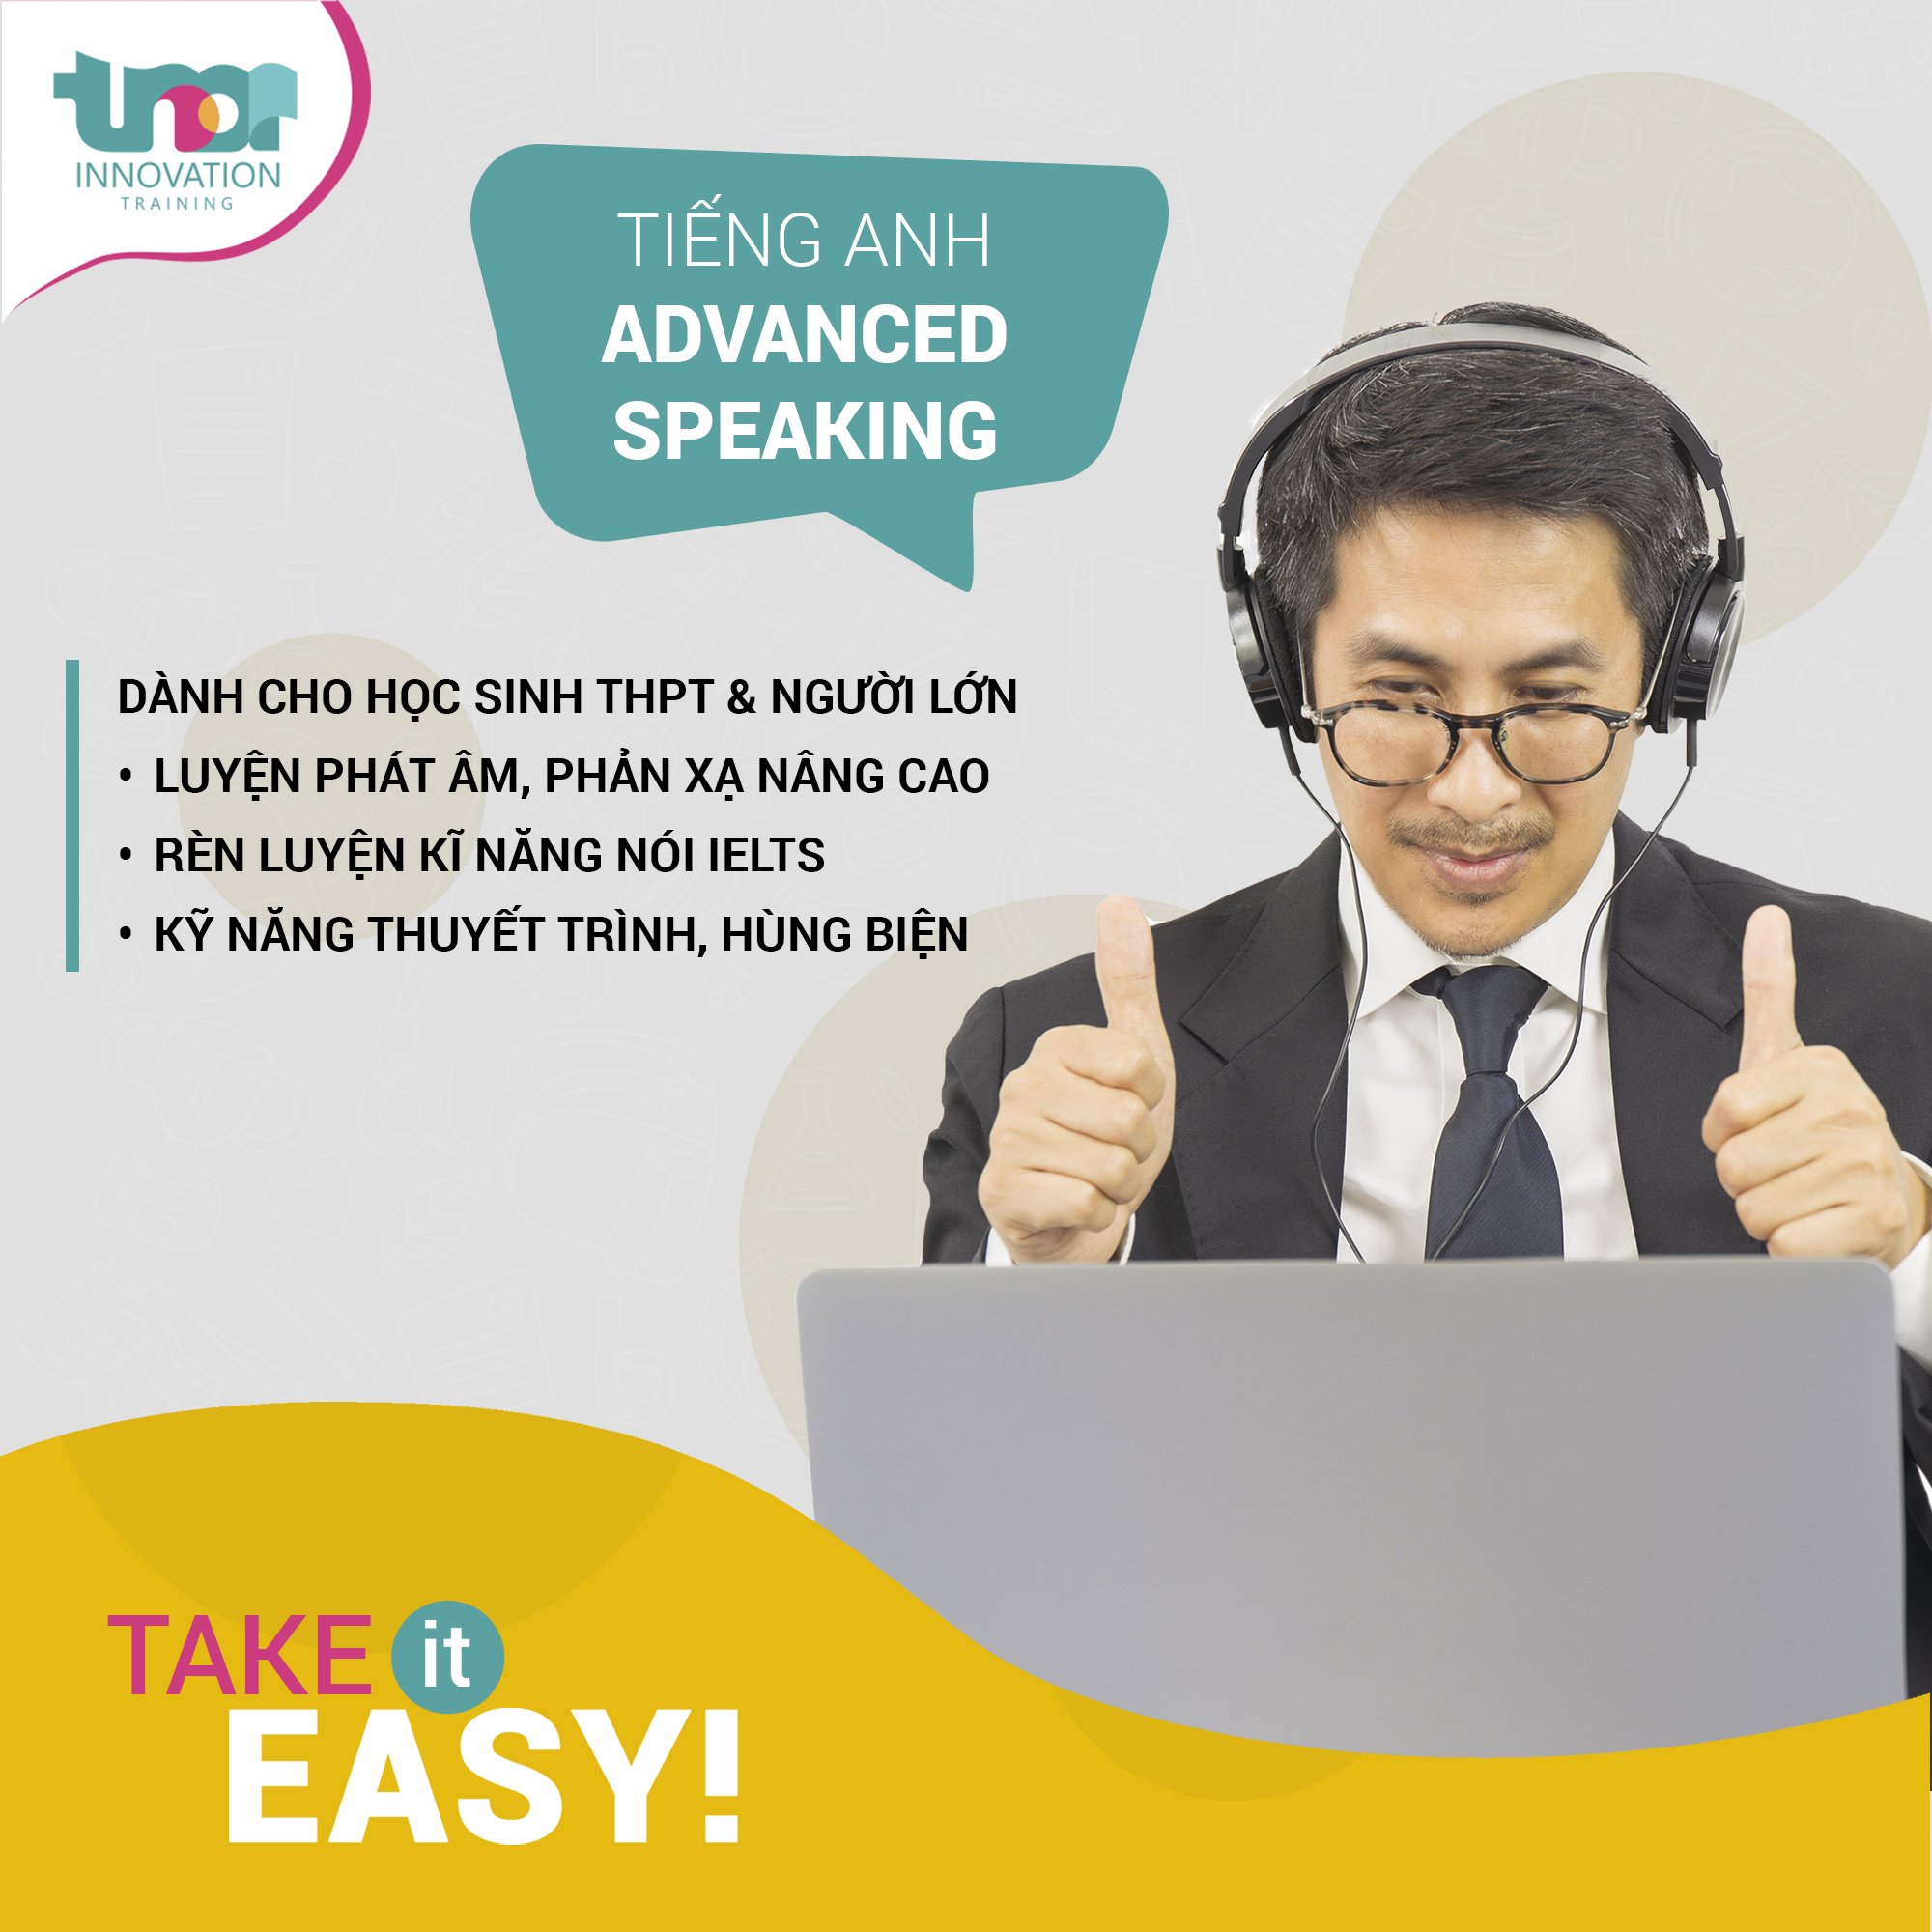 TIẾNG ANH ADVANCED SPEAKING